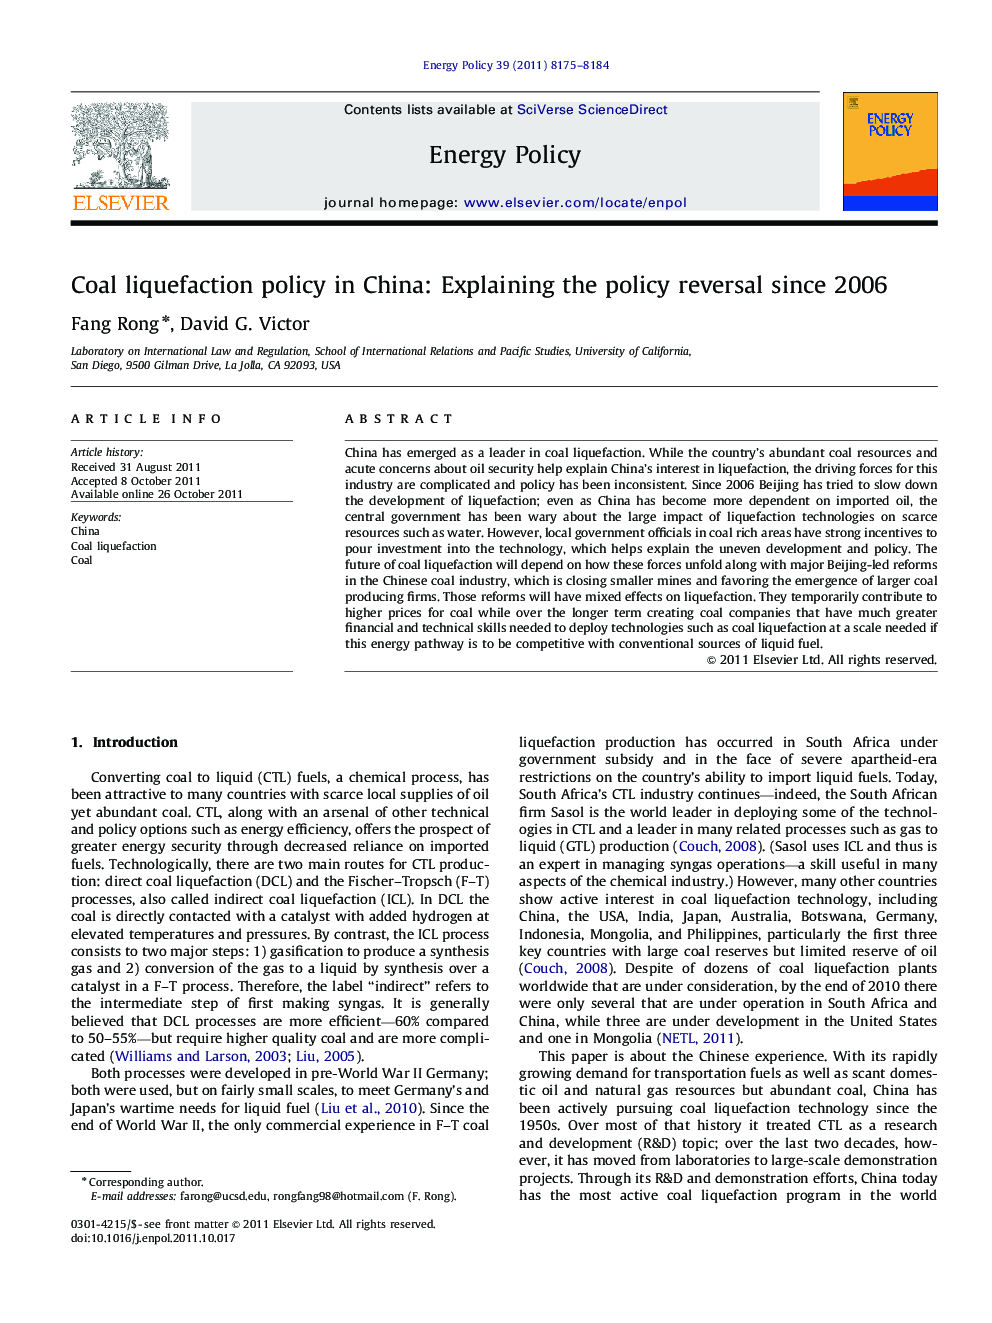 Coal liquefaction policy in China: Explaining the policy reversal since 2006